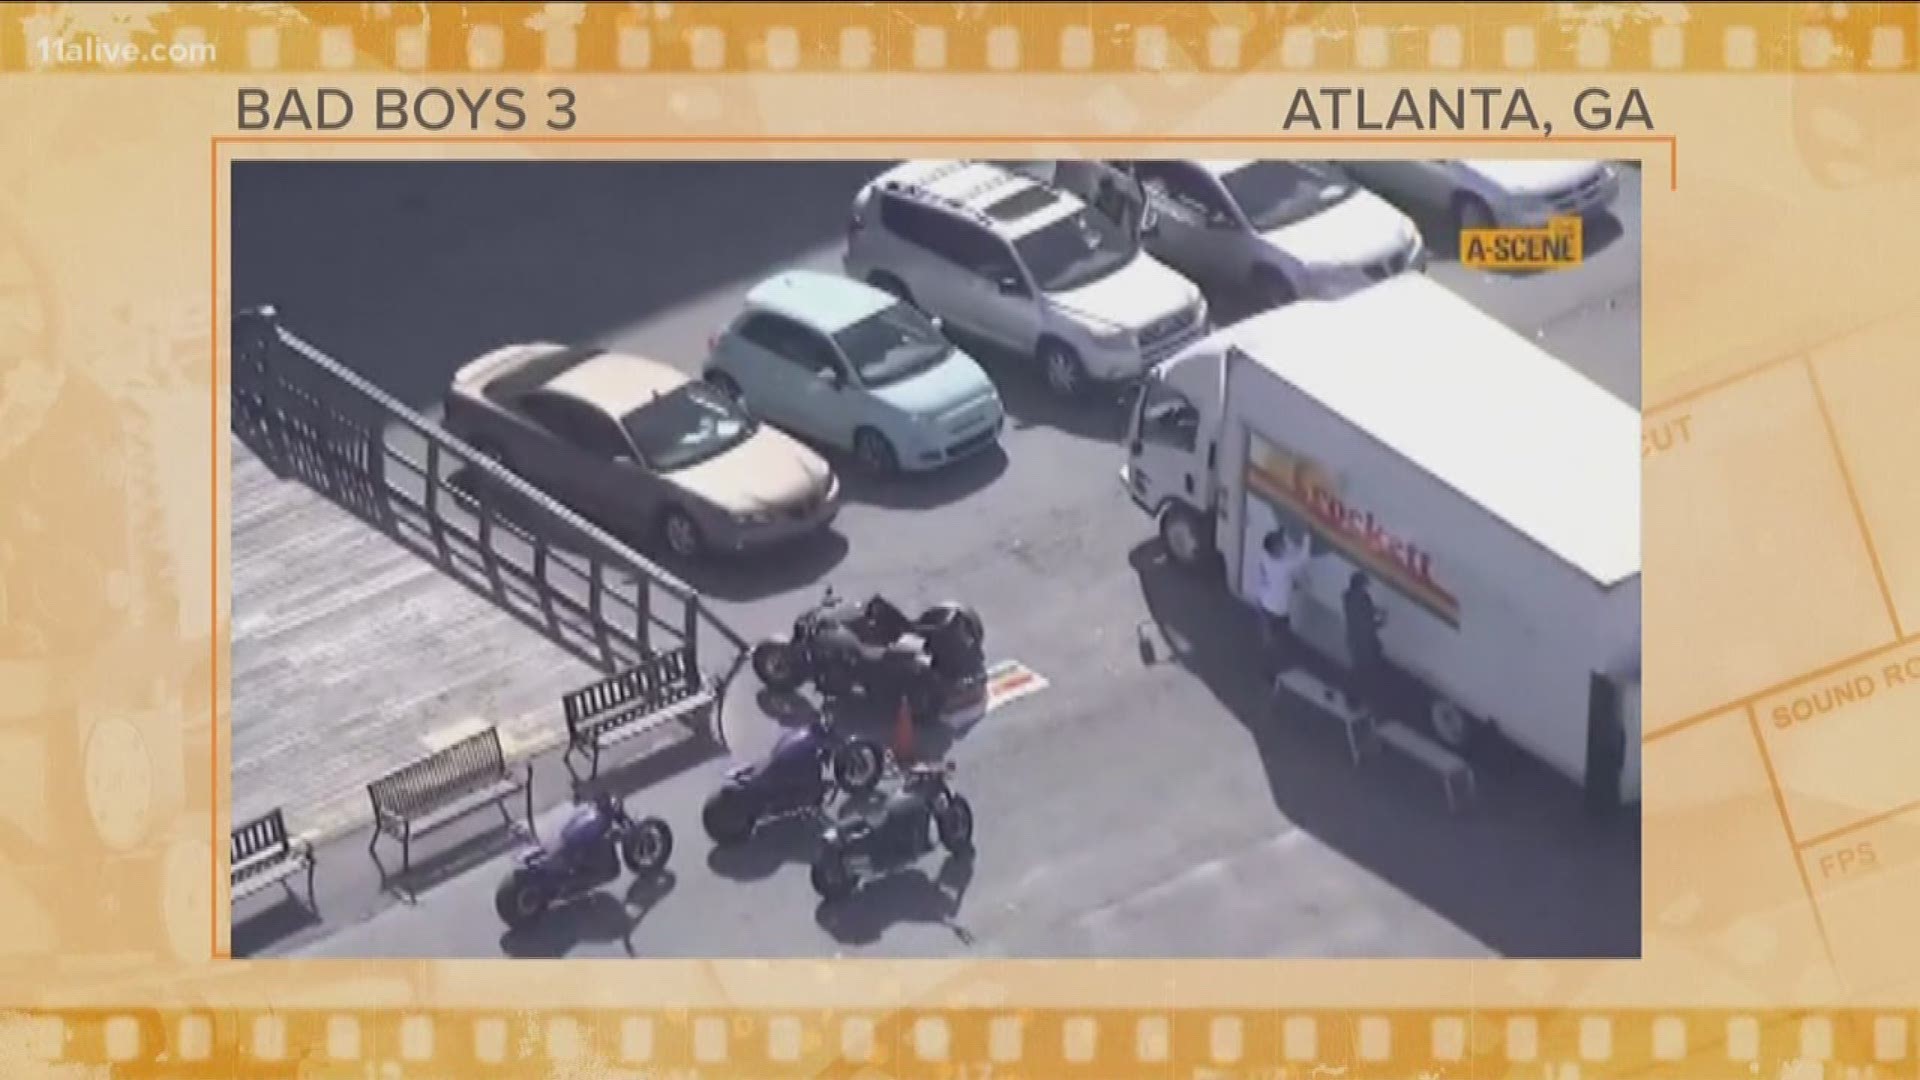 We caught Bad Boys 3 filming at the Atlantic Station overnight.